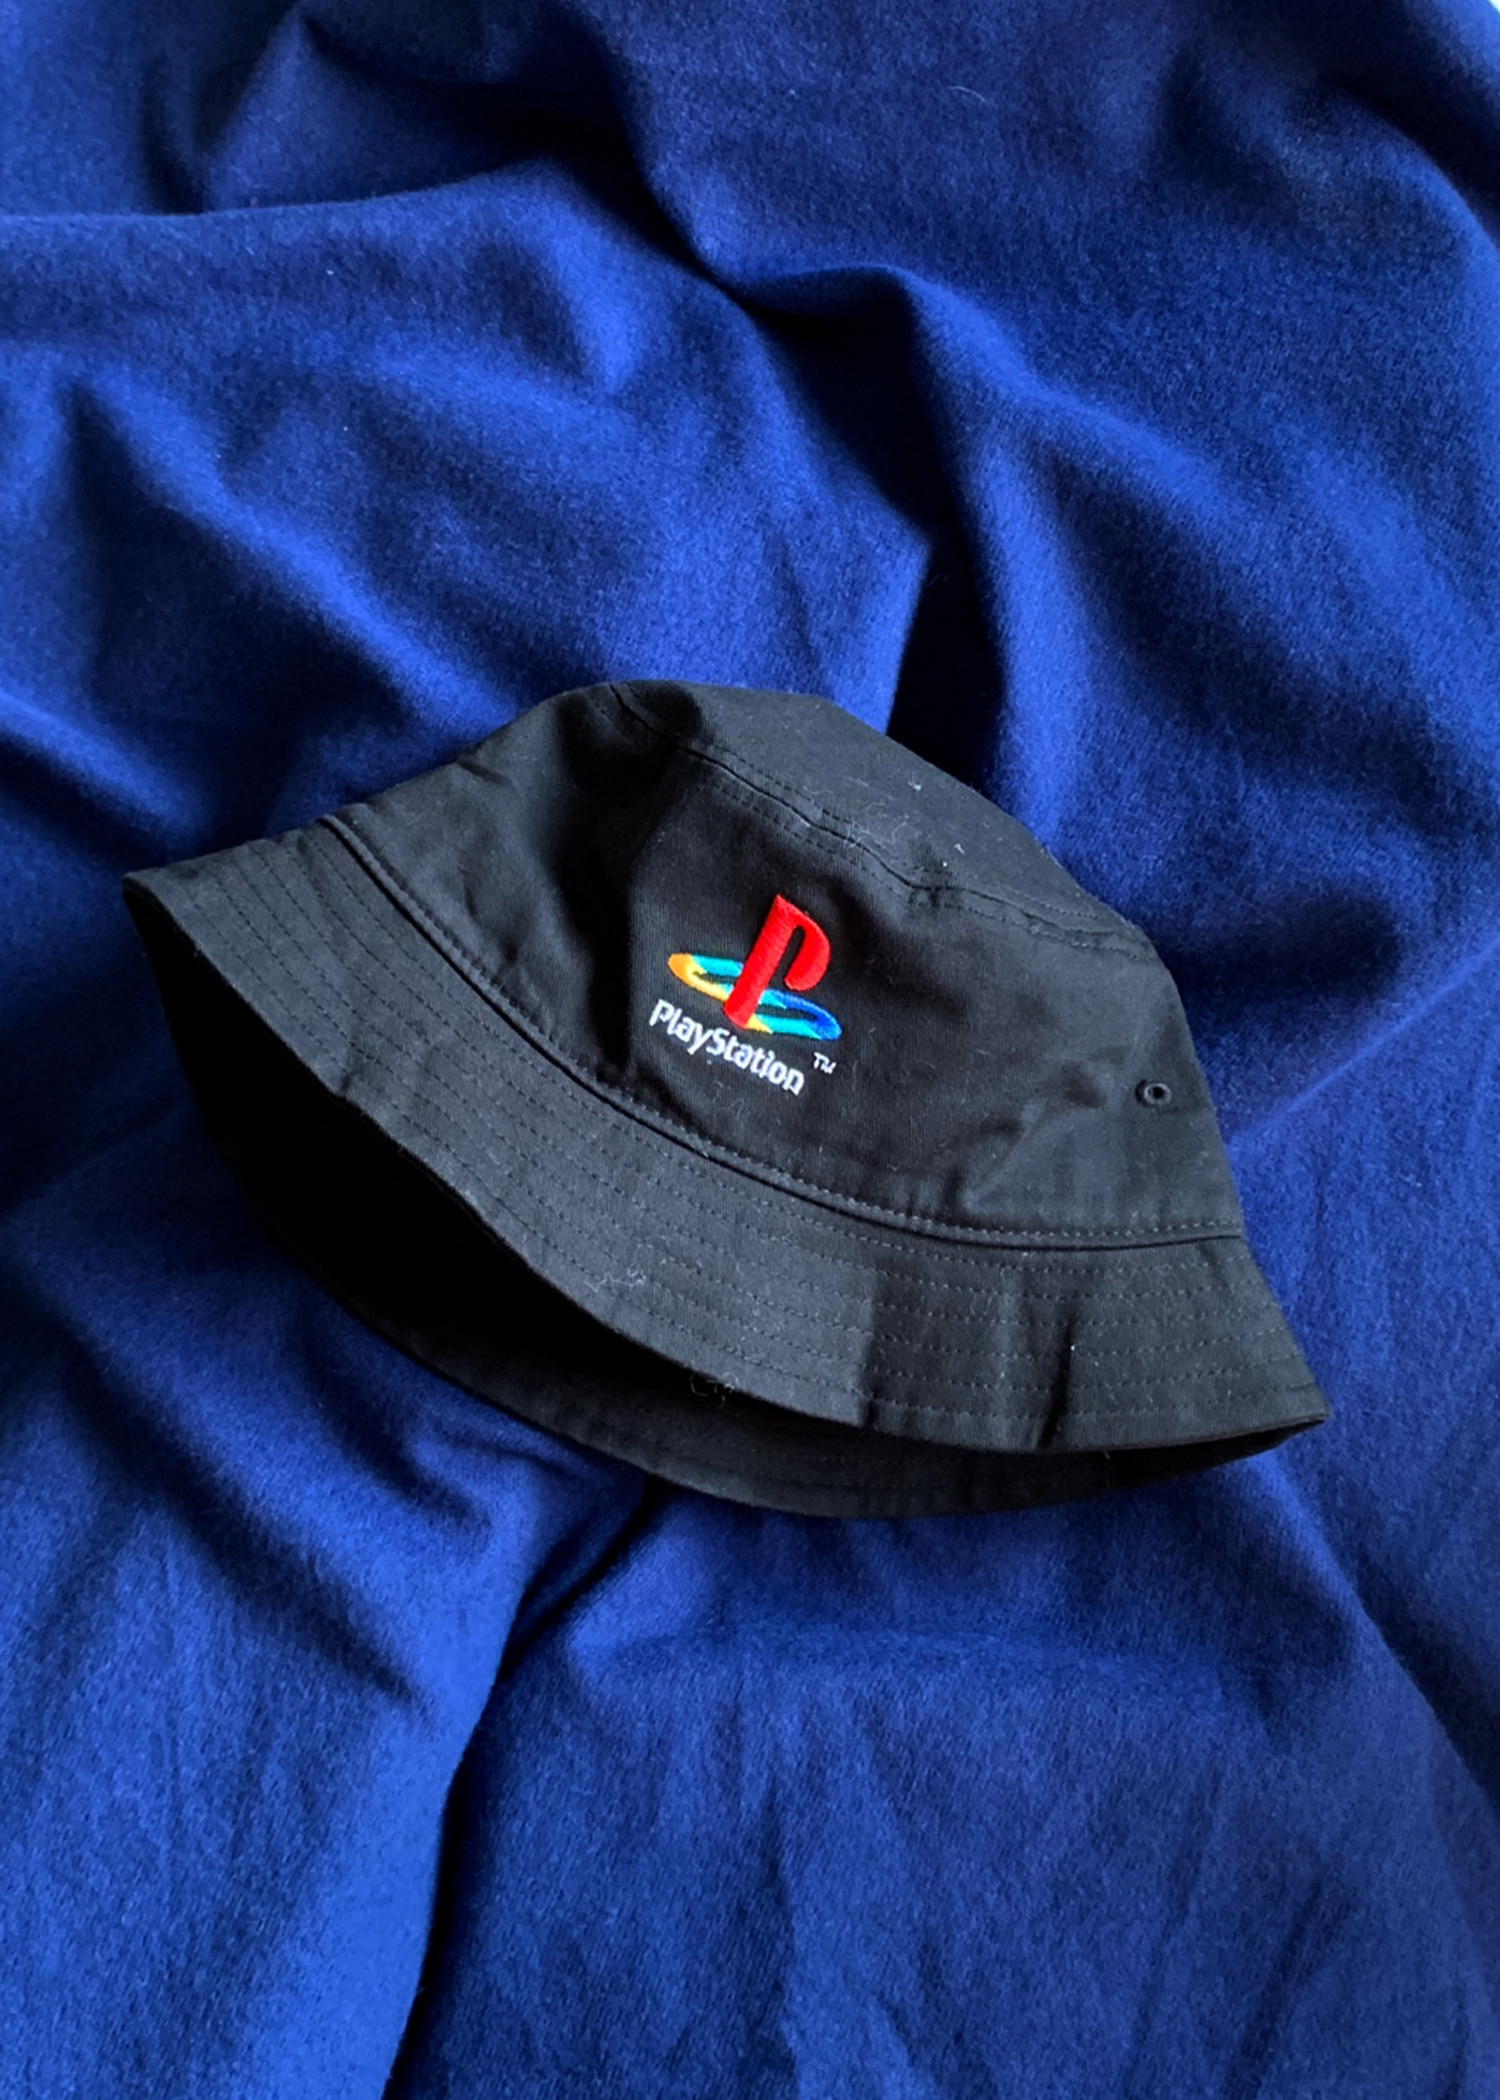 select vintage : Play Station bucket hat